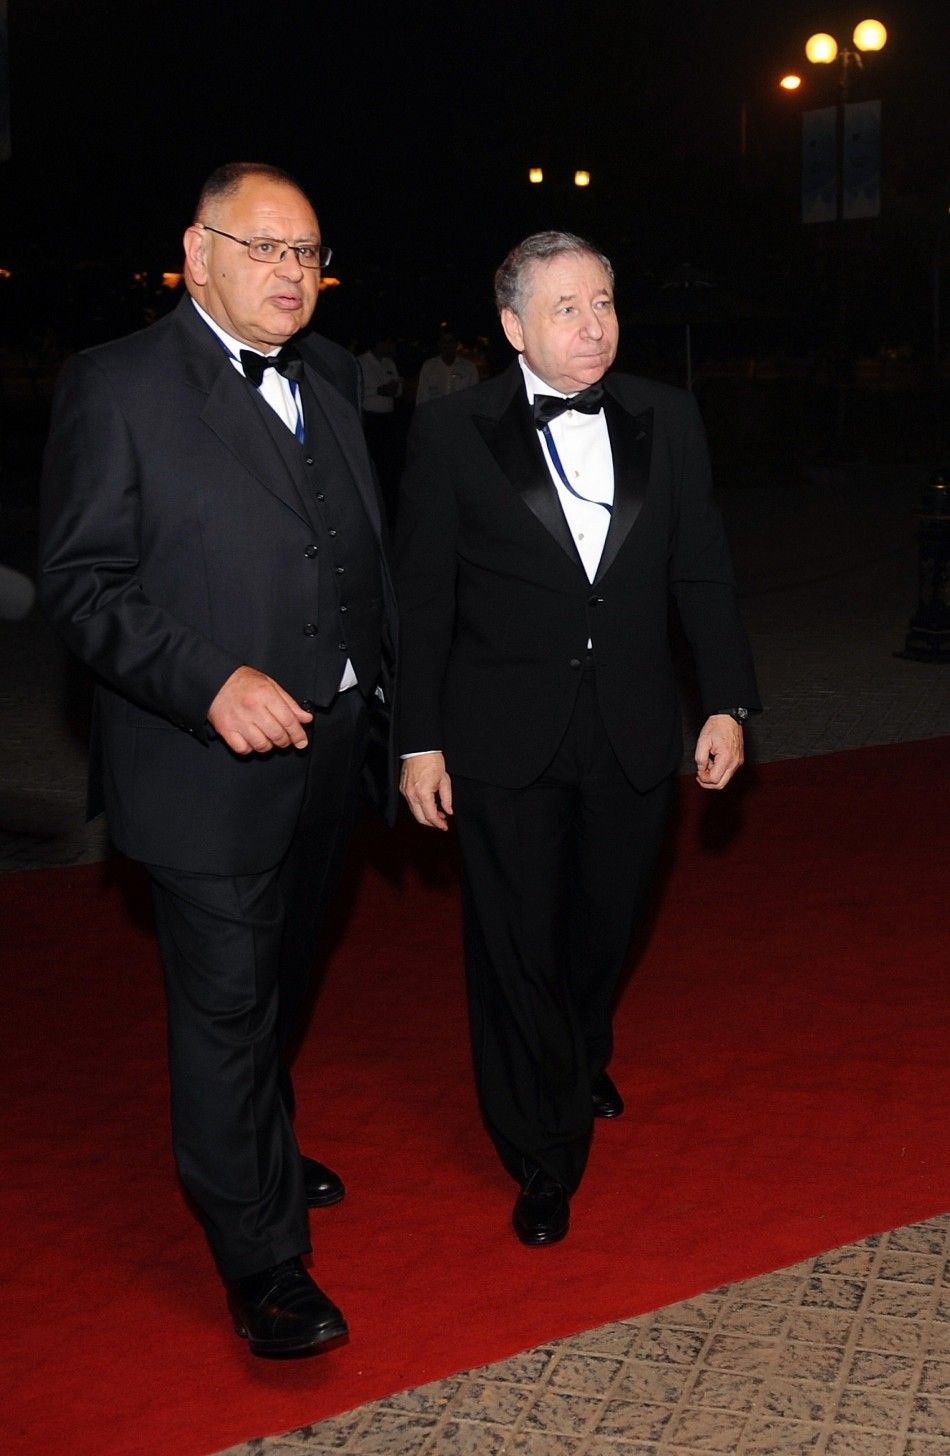 Head of the Federation Internationale de lAutomobile Jean Todt arrives for the 2011 FIA Gala night in Gurgaon